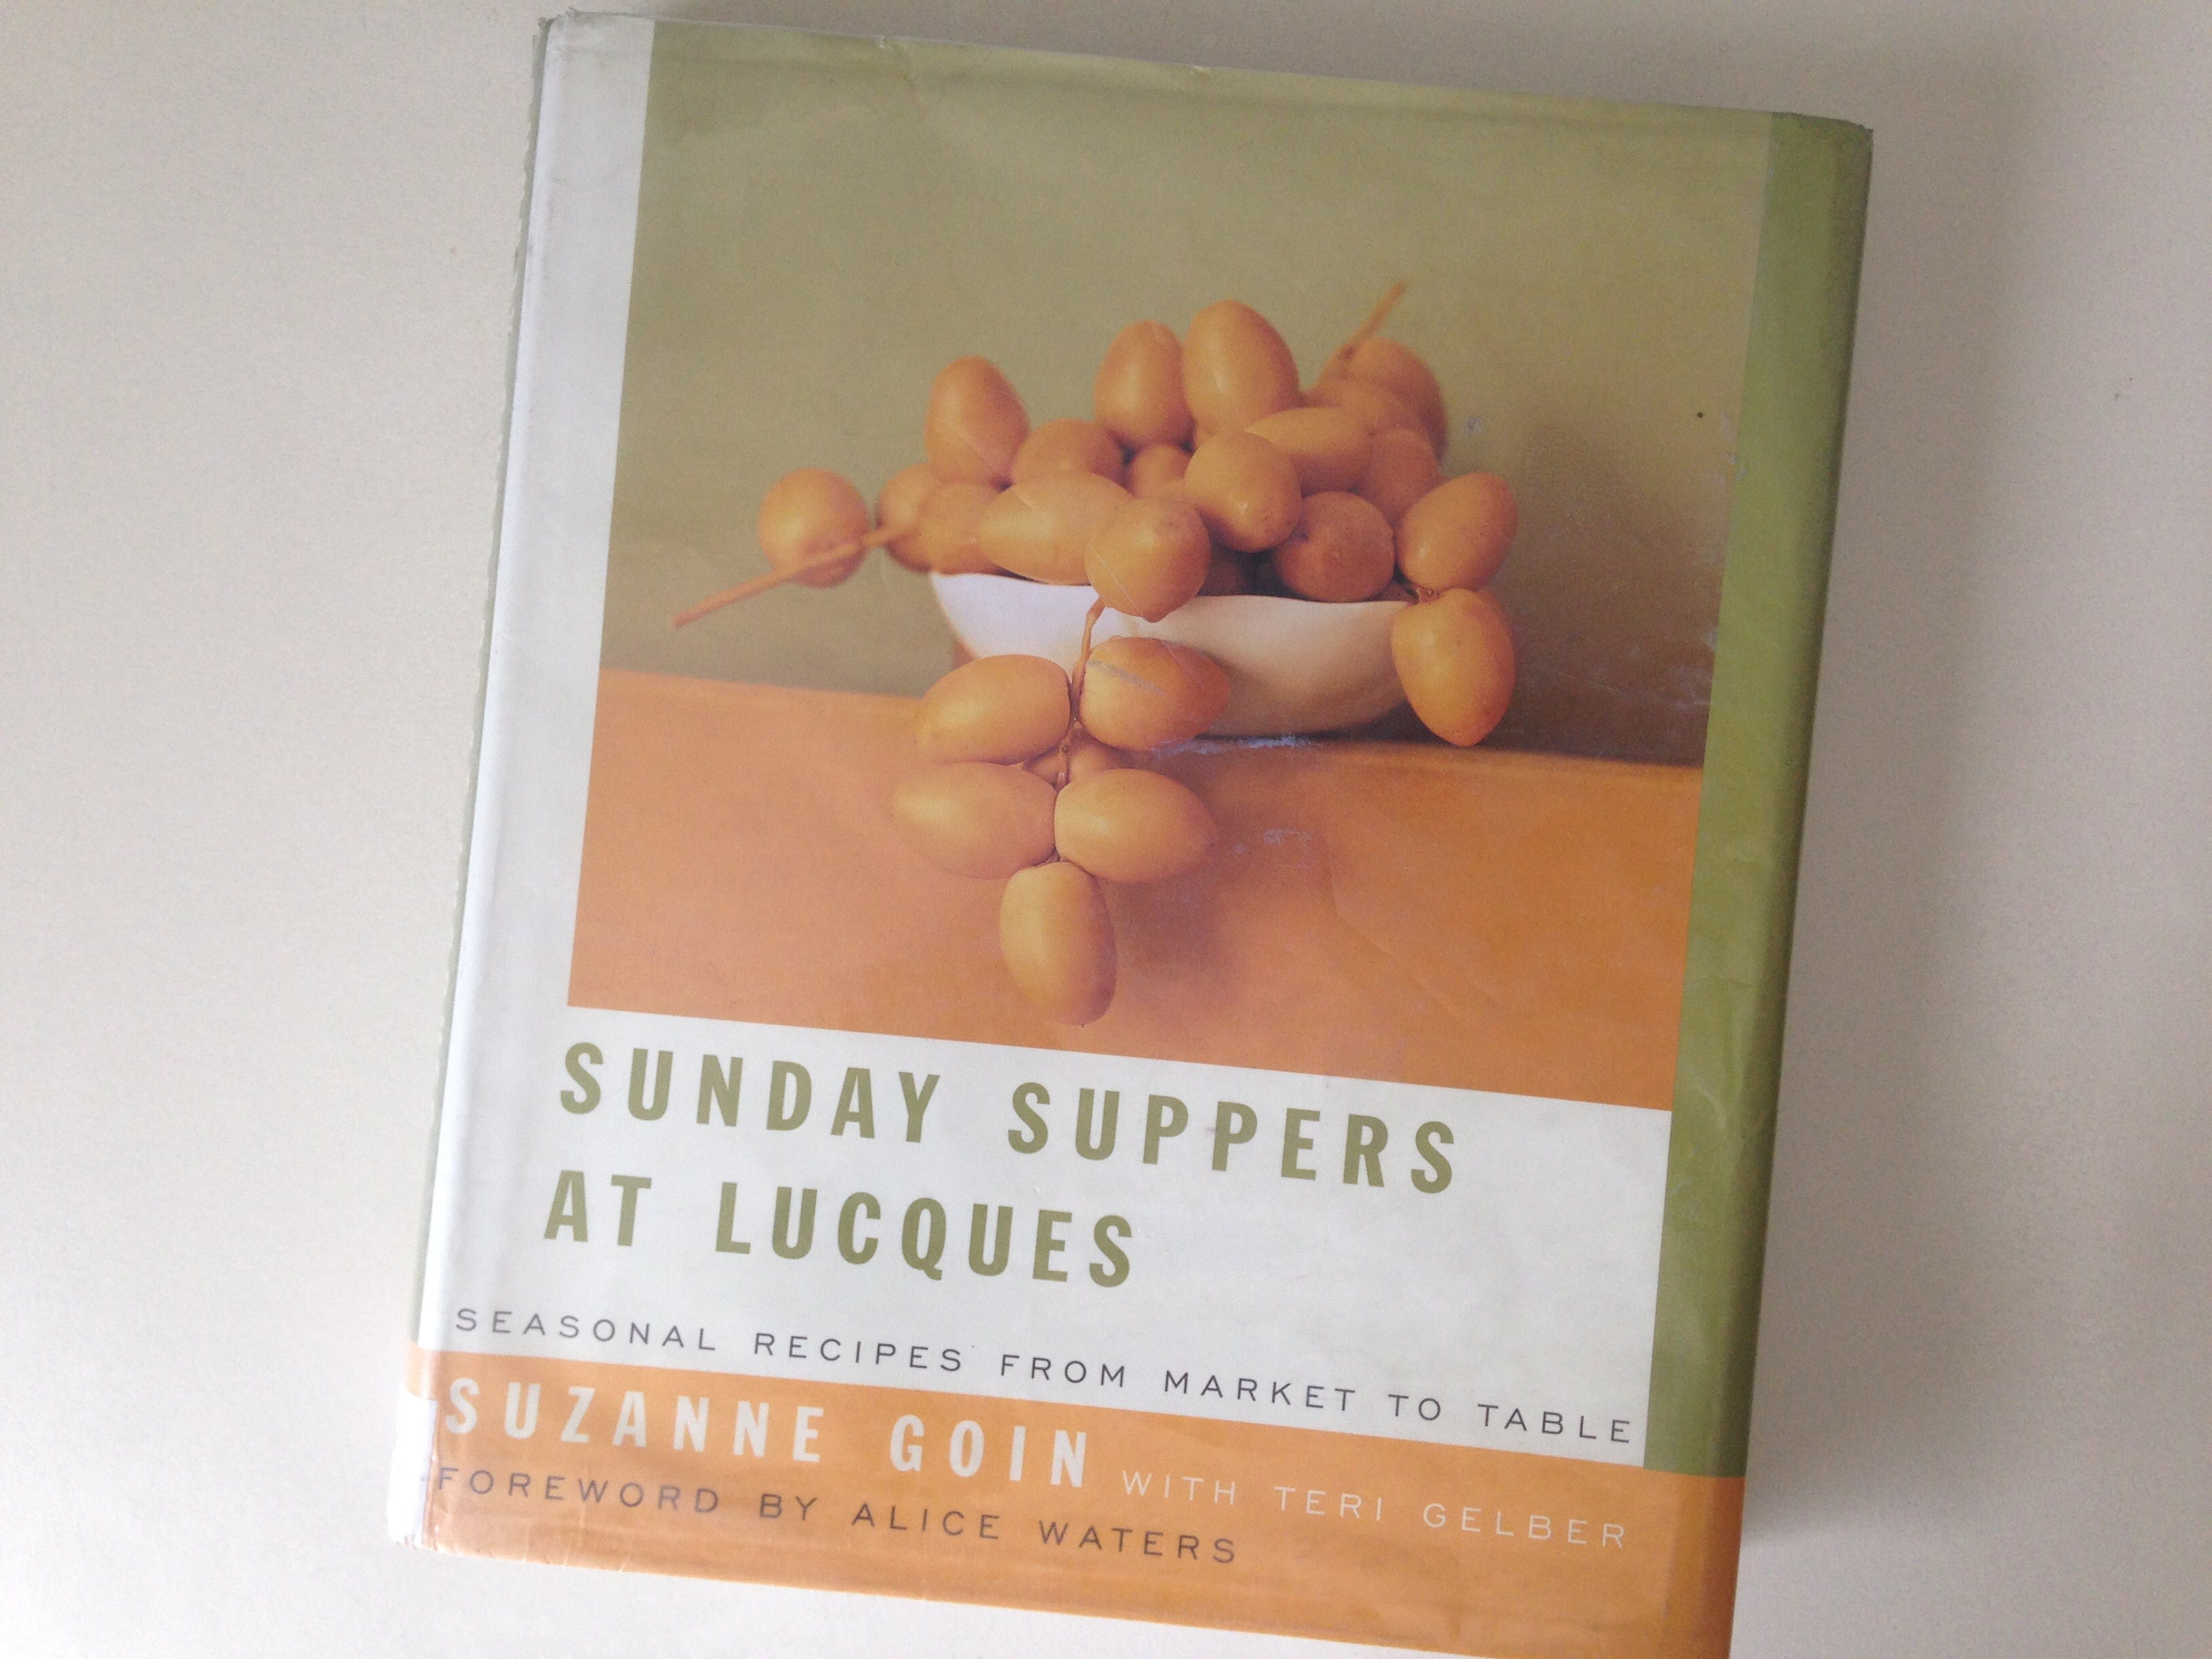 Sunday Suppers at Lucques cookbook